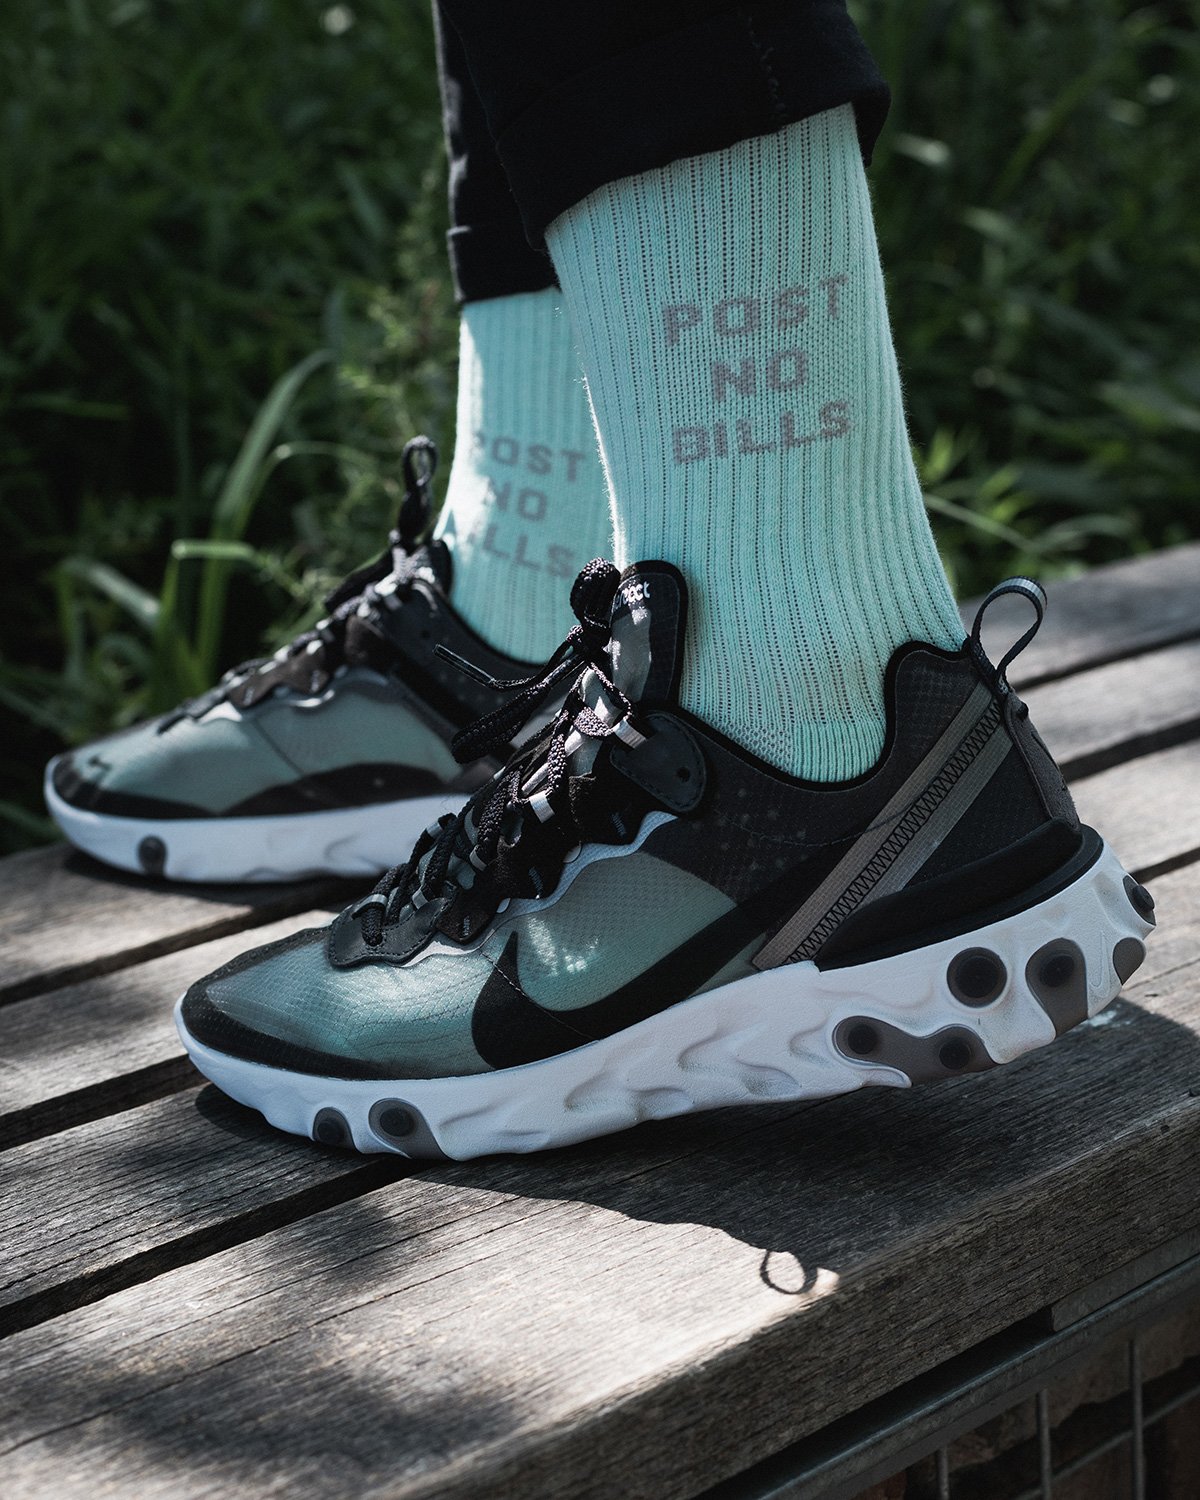 atmos USA on Twitter: "Nike React Element 87 “Anthracite” will be available  Friday in-store and online. Raffle is now live. To enter:  https://t.co/vOHiiKFhbz https://t.co/hXr1w21UOj" / Twitter